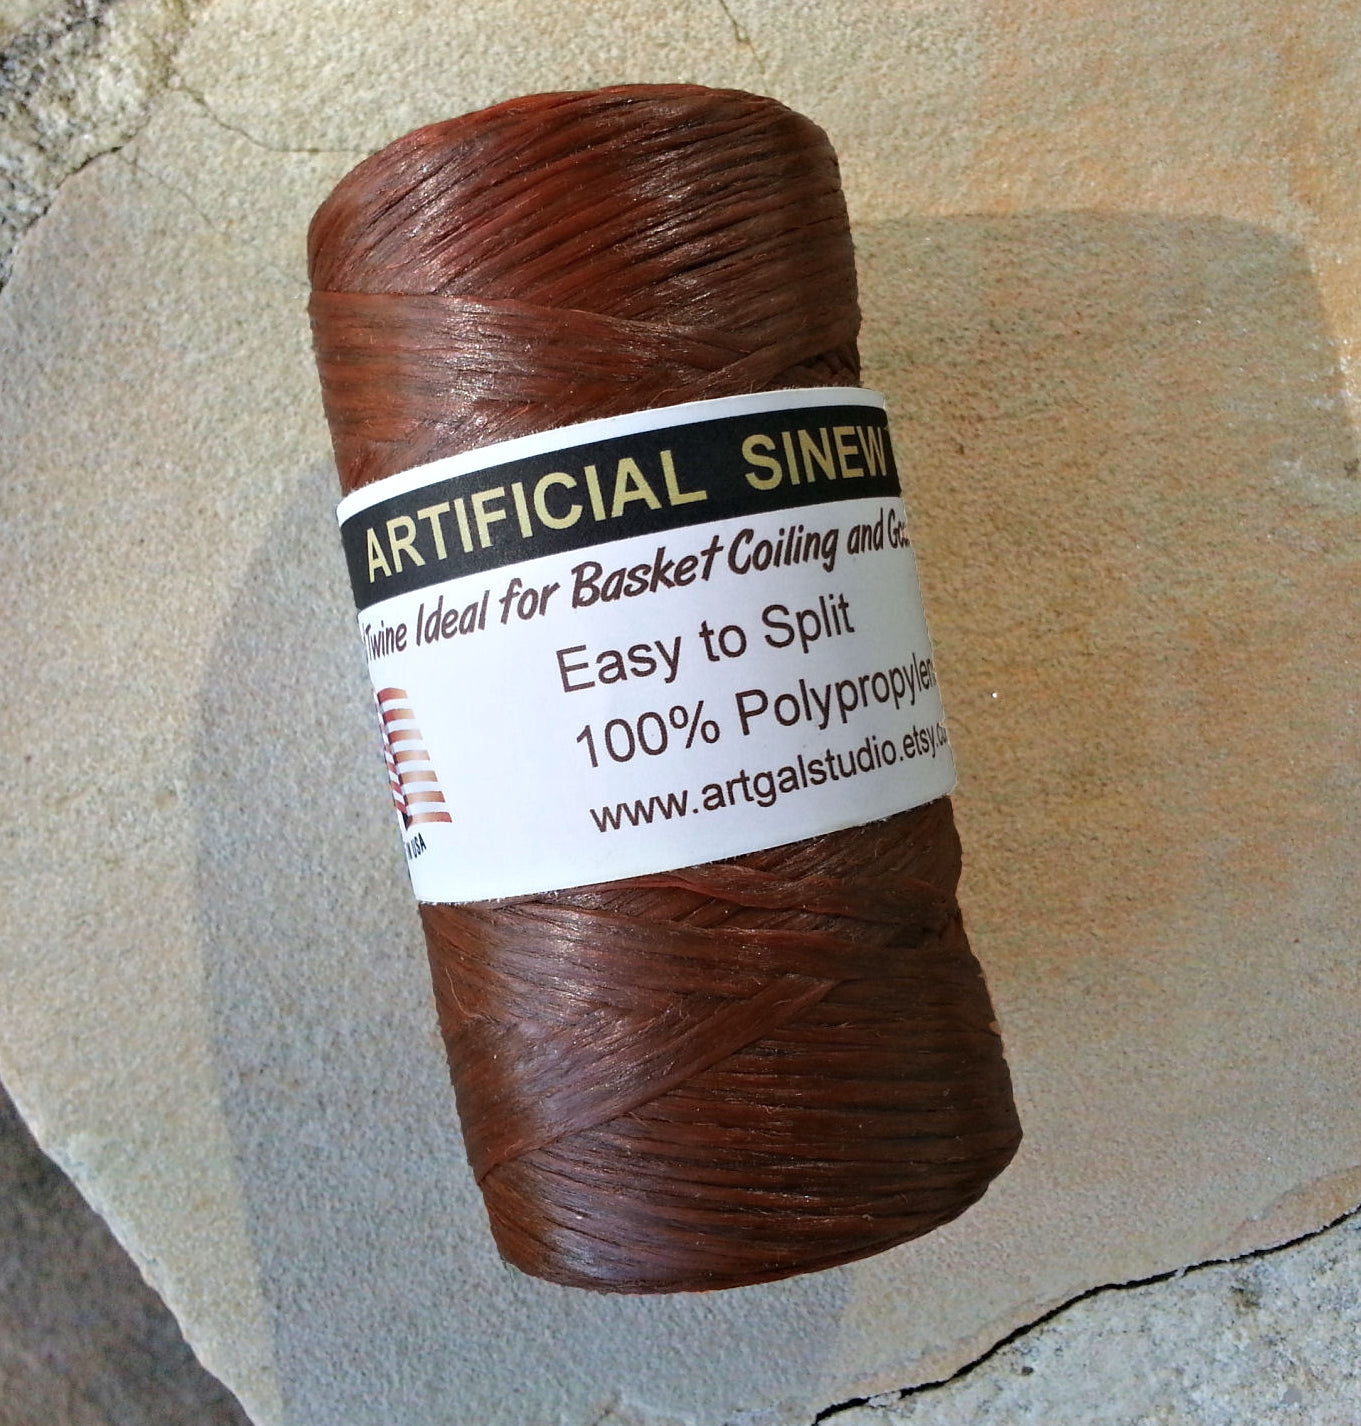 Imitation / Artificial SINEW 4 oz Spool, for Pine Needle Basketry, Leather Craft, Gourd Art, Dreamcatchers